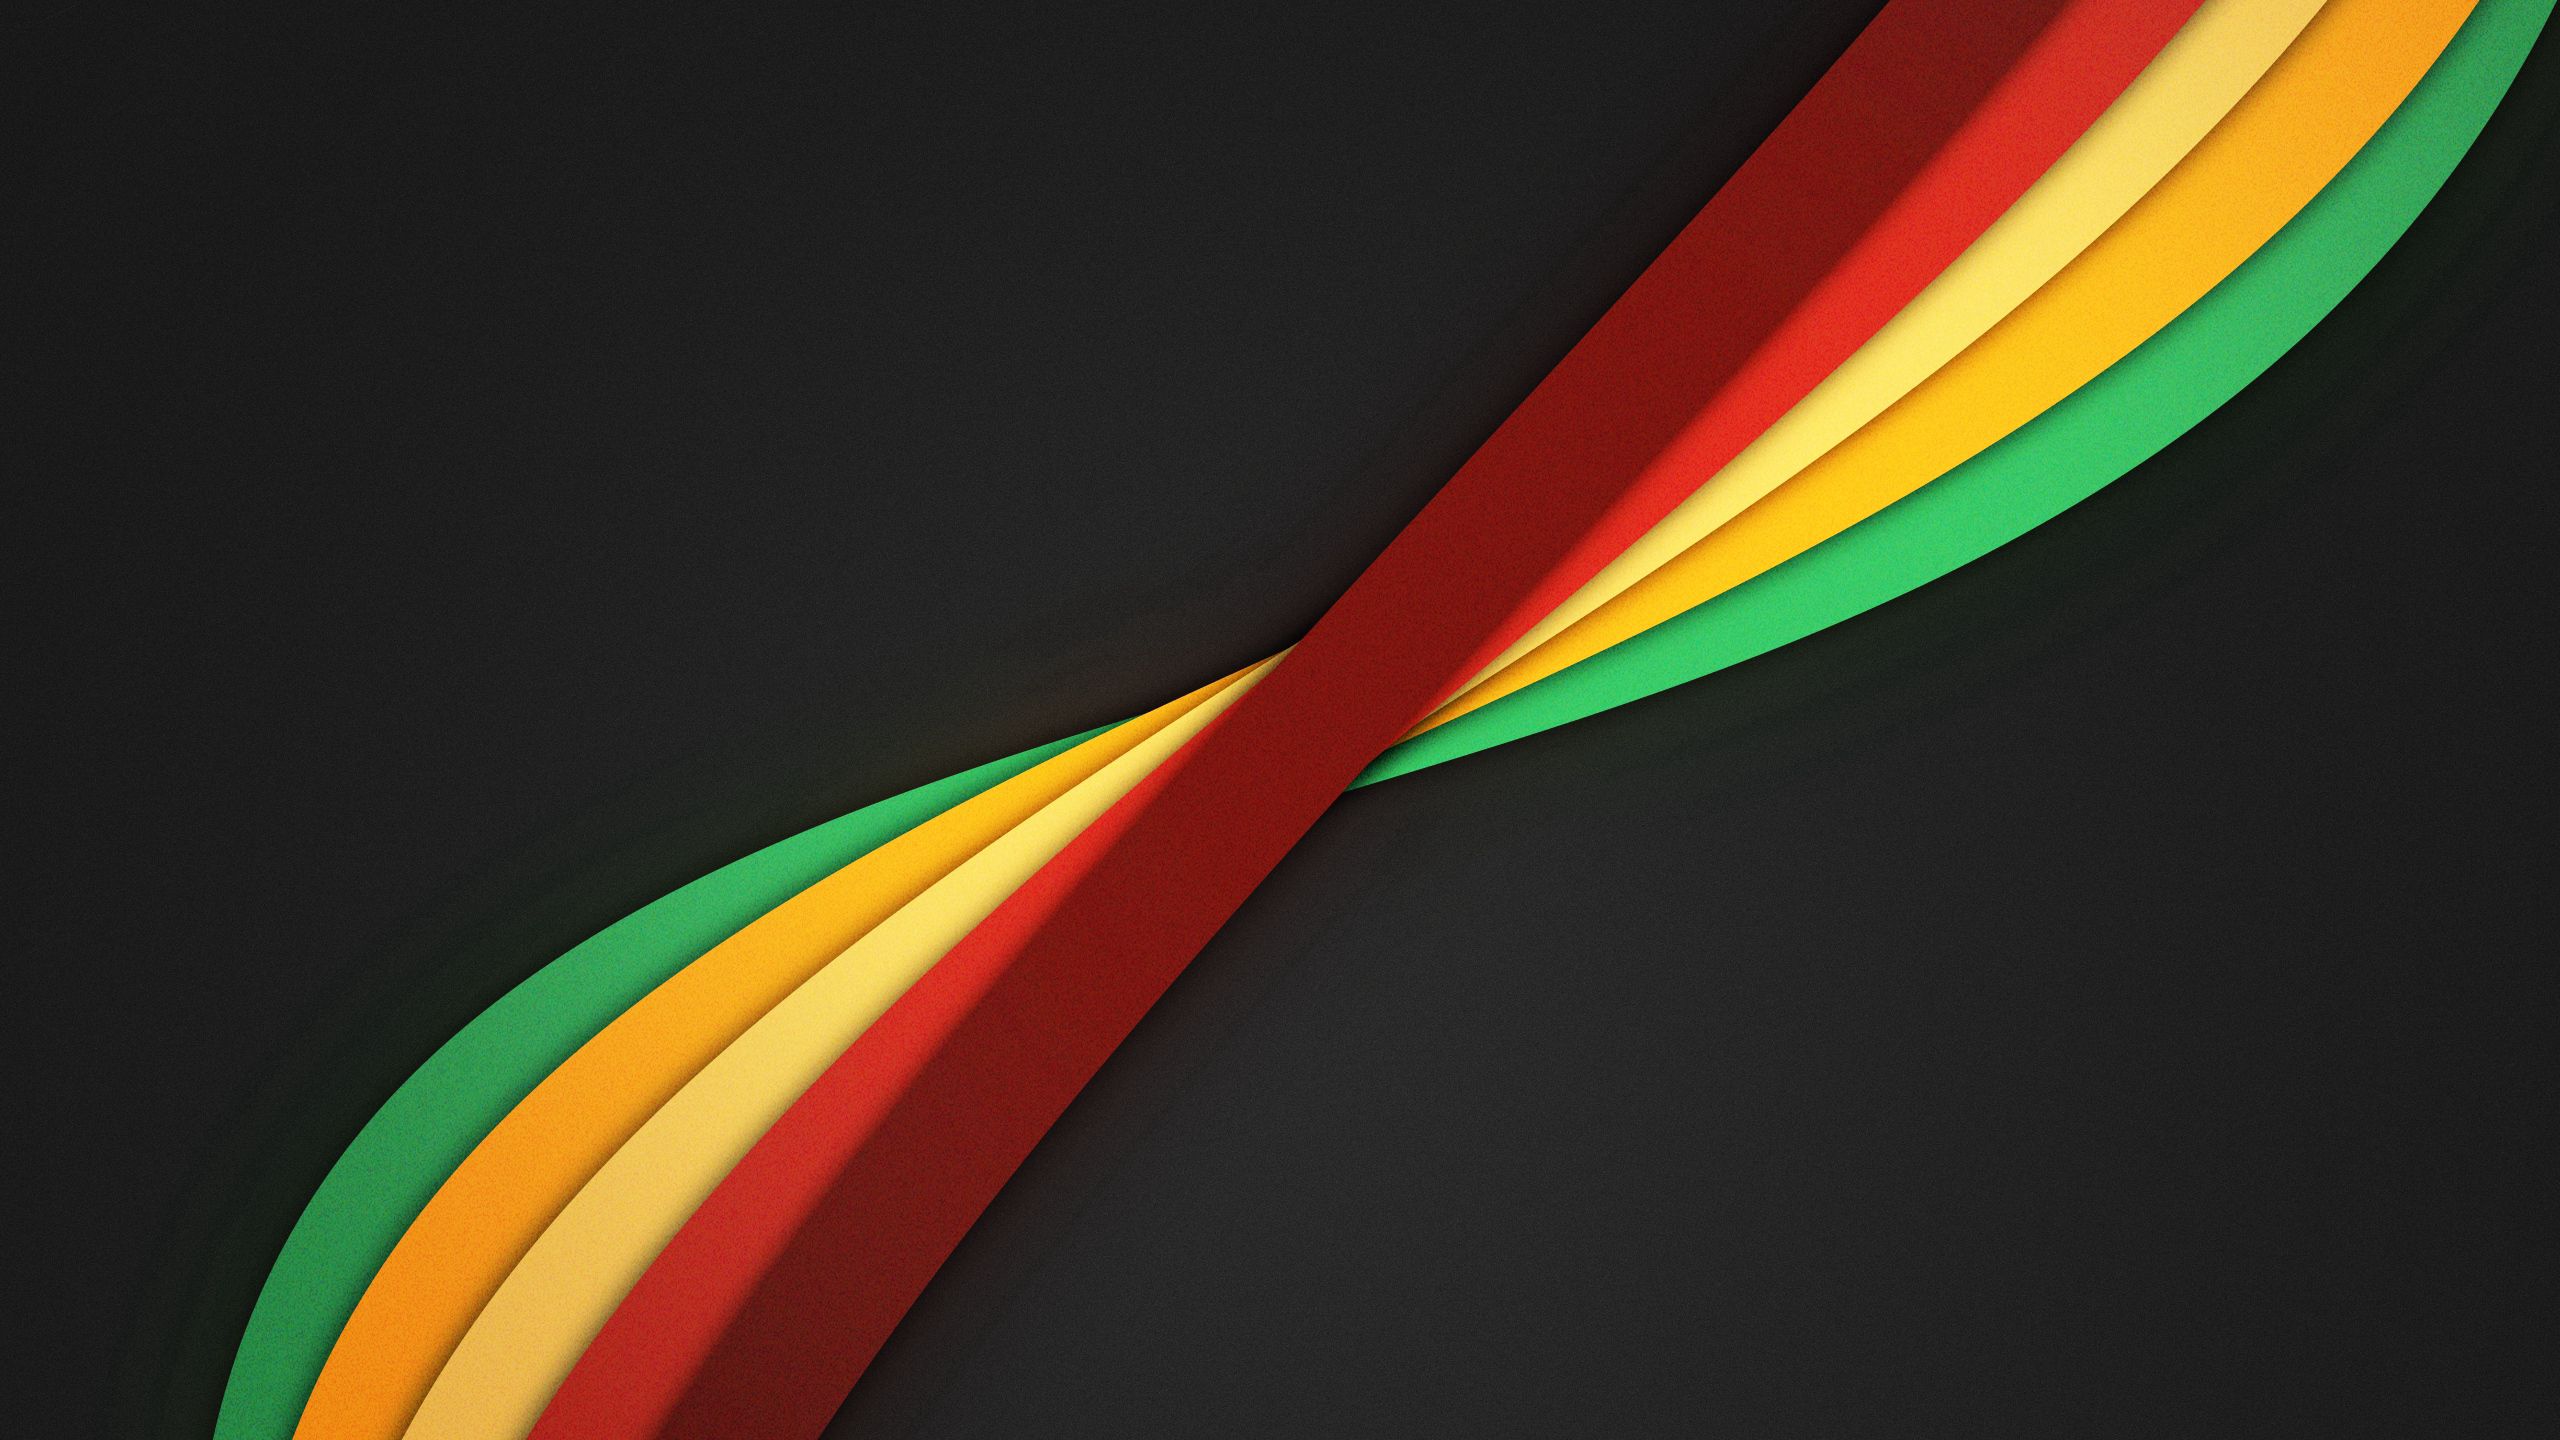 motley, lines, abstract, background, multicolored download HD wallpaper